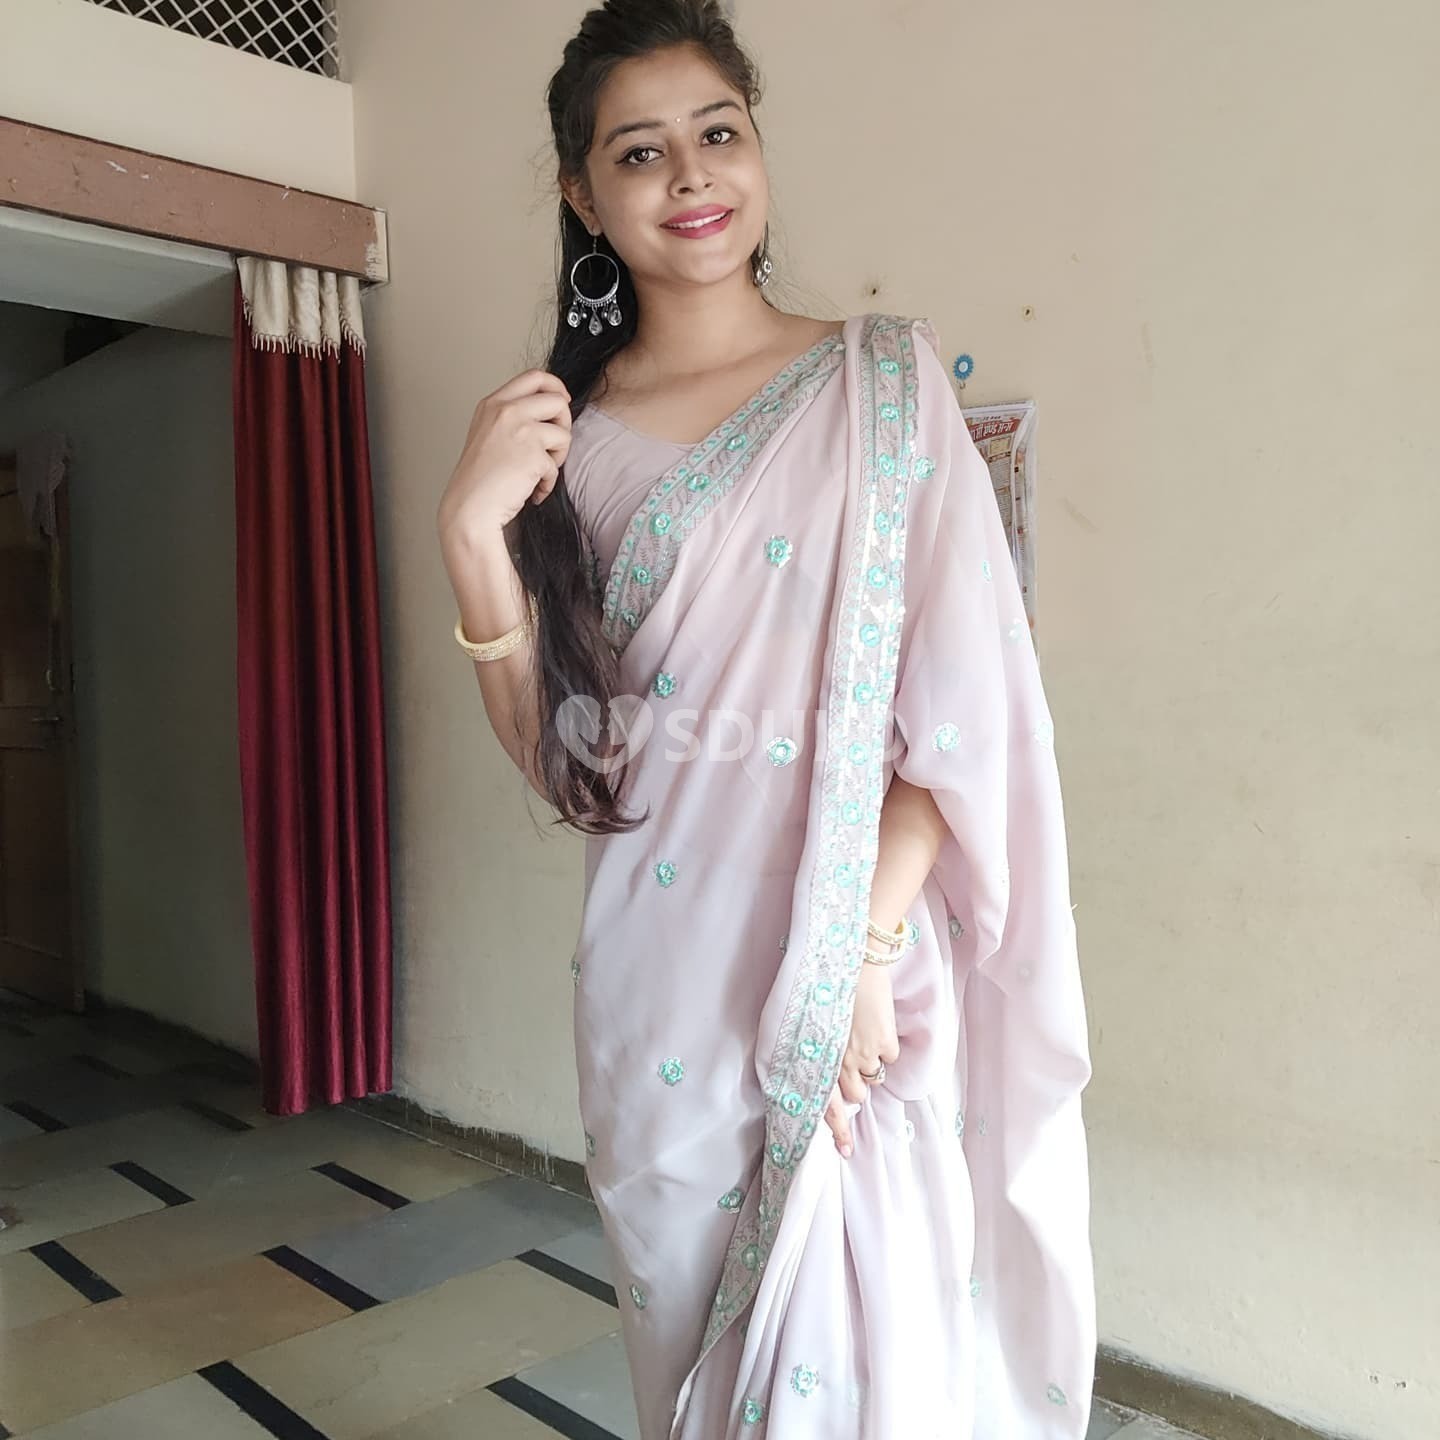 VIJAYAWADA LOW PRICE 100% SAFE AND SECURE INDIPENDENT CALL GIRL ESCORT INCALL//OUTCALL SERVICE AVAILABLE